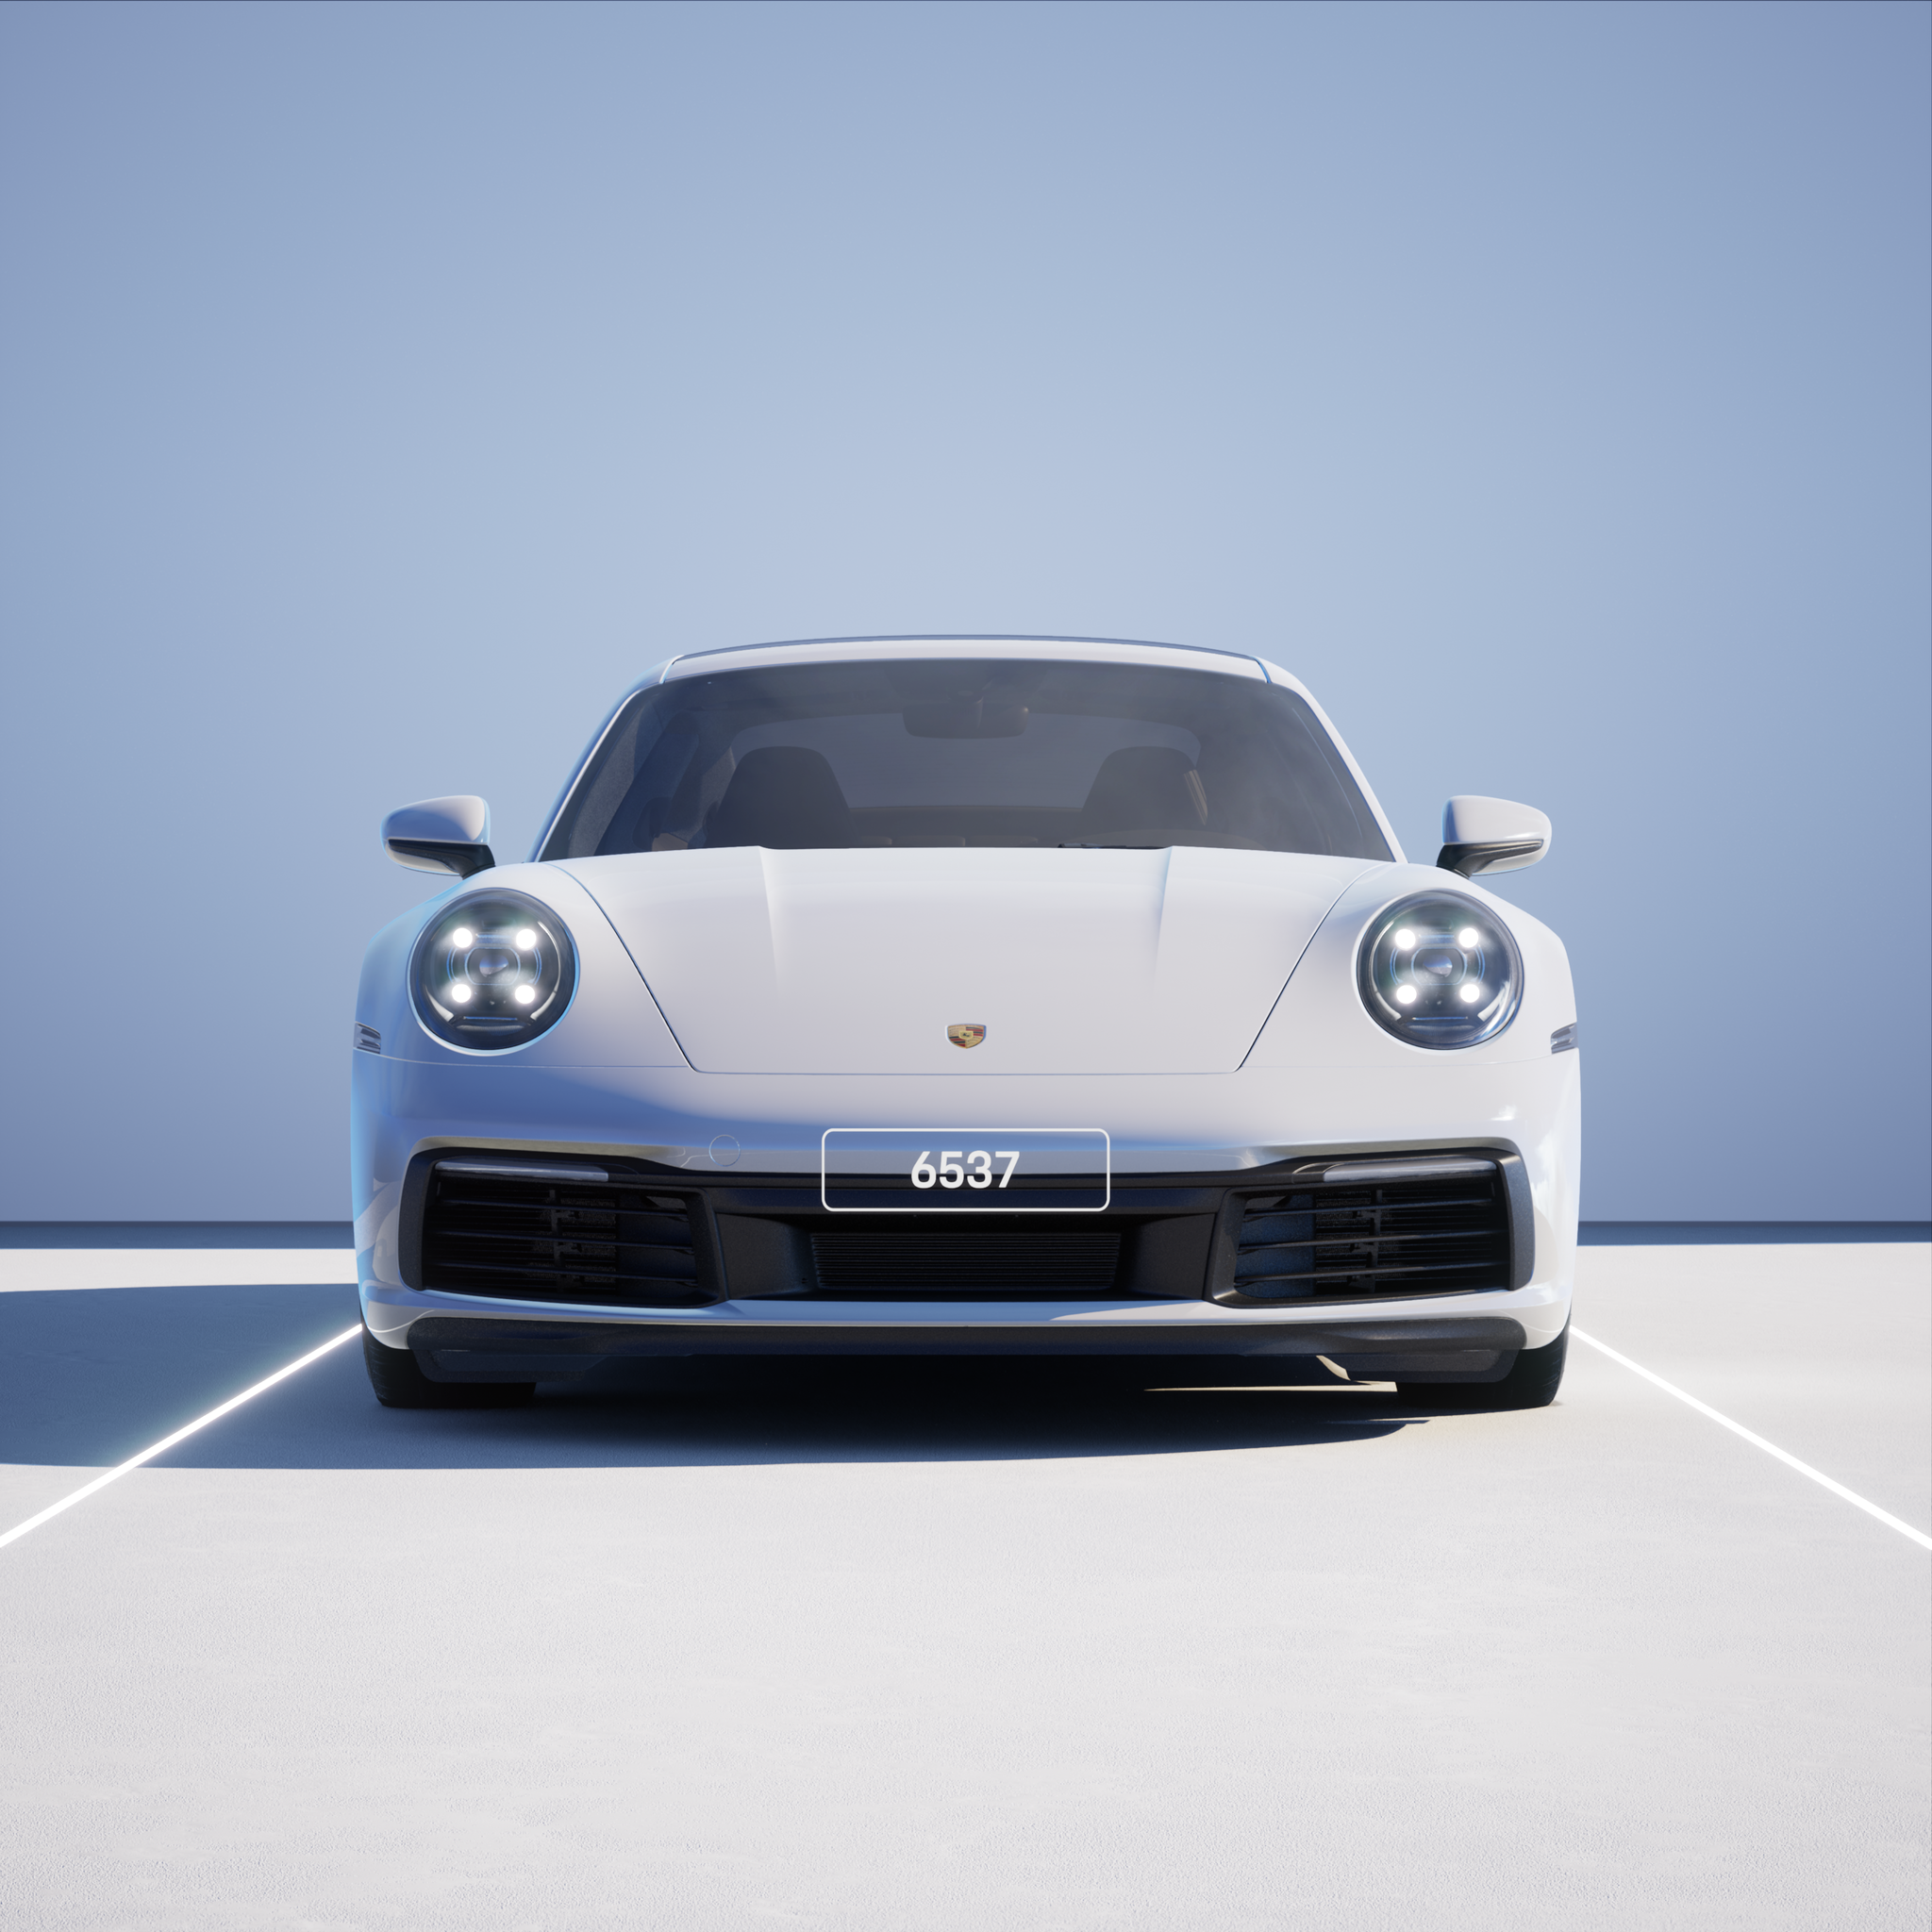 The PORSCHΞ 911 6537 image in phase